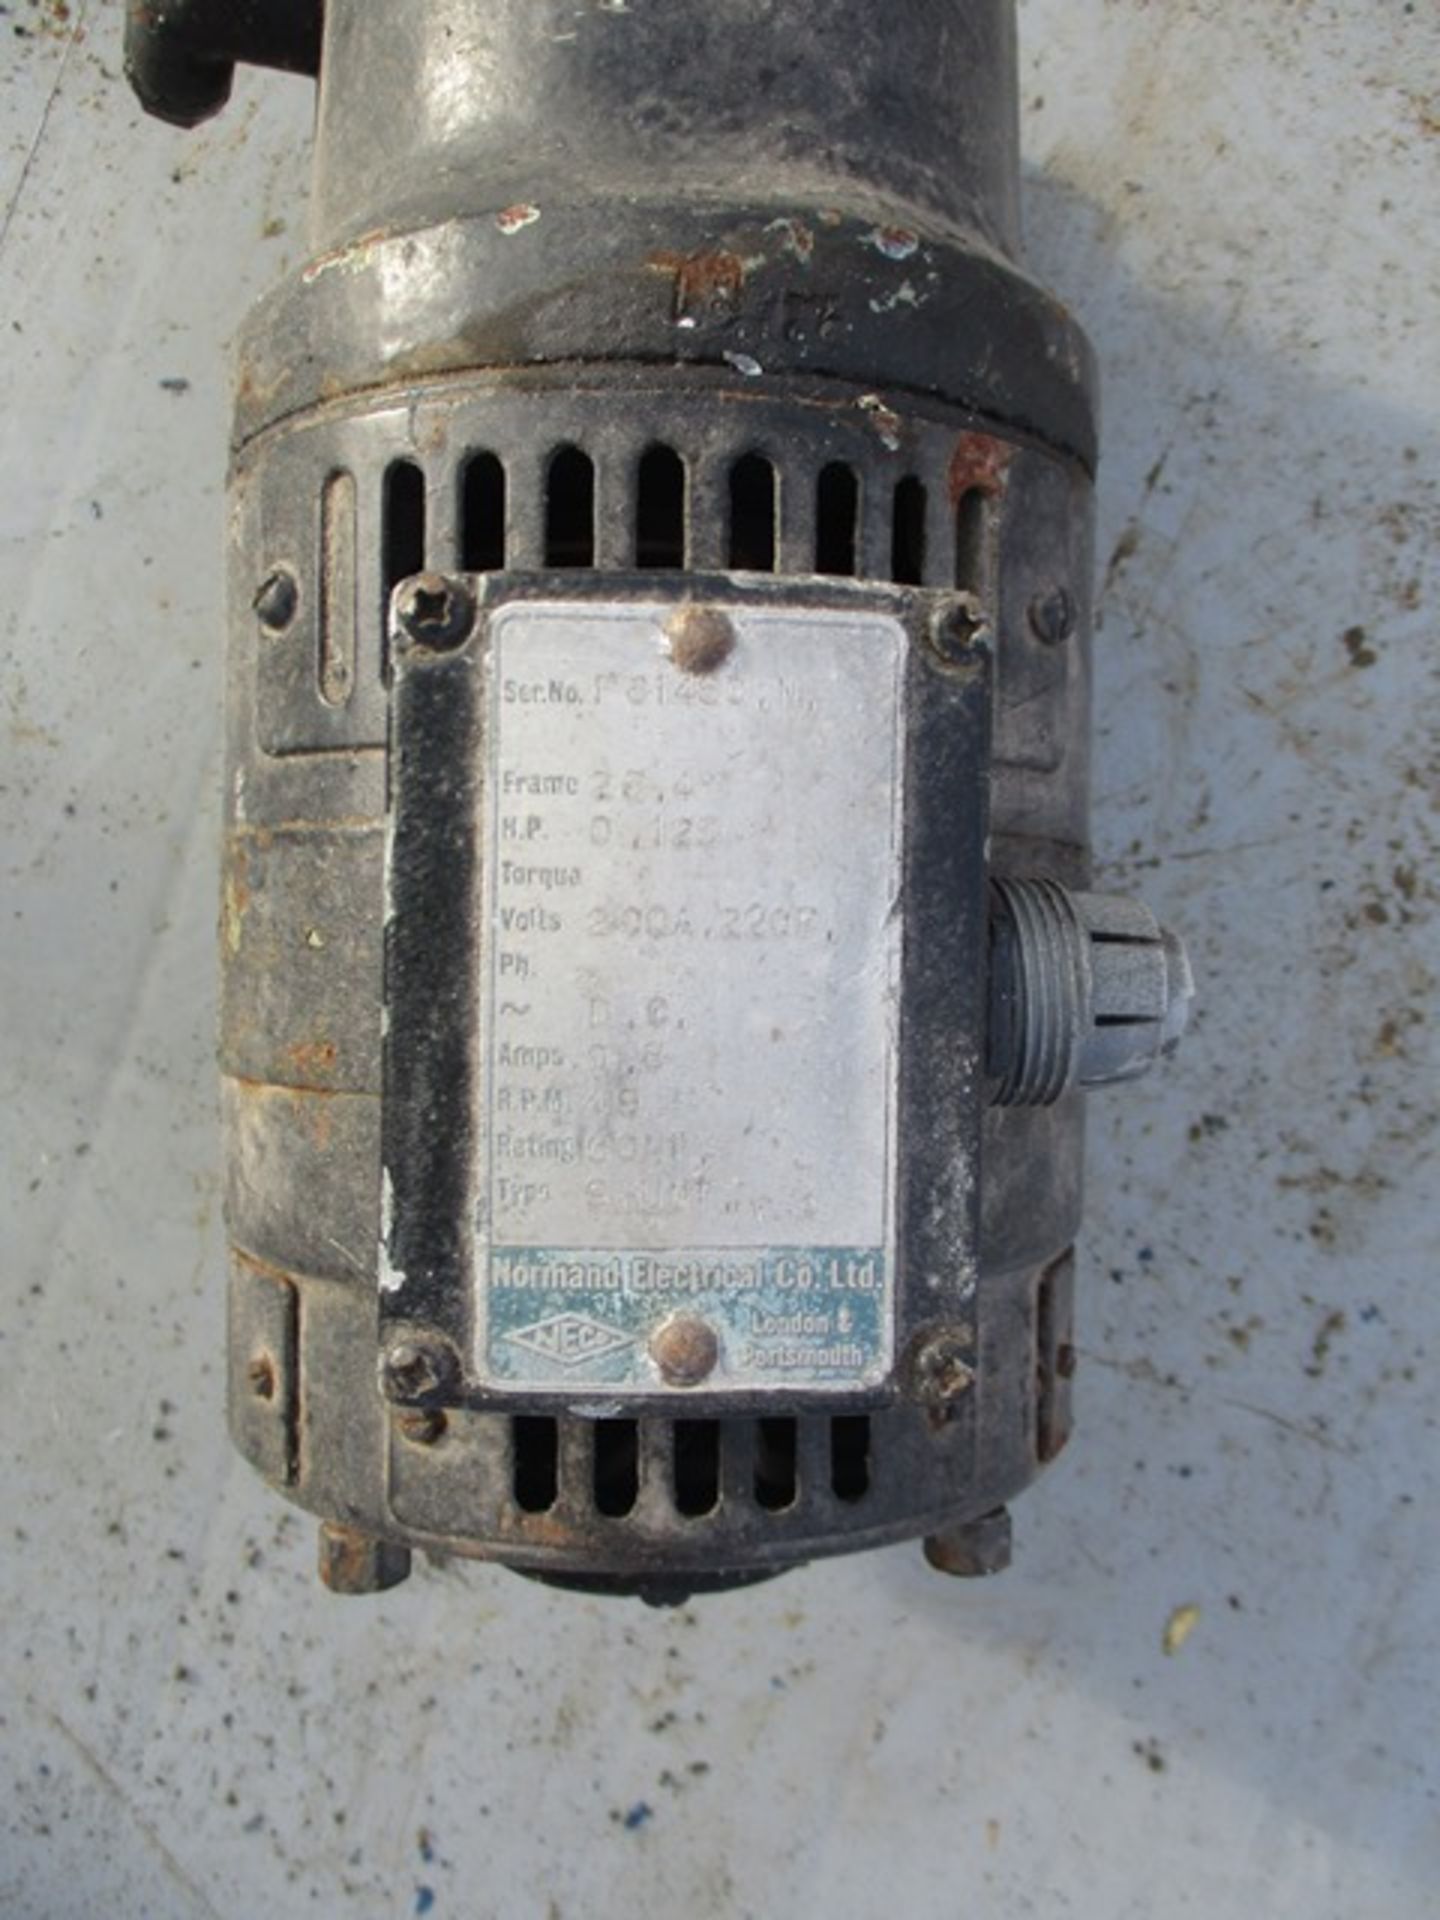 Normand Electrical SHUNT Motor Gearbox - Image 2 of 2